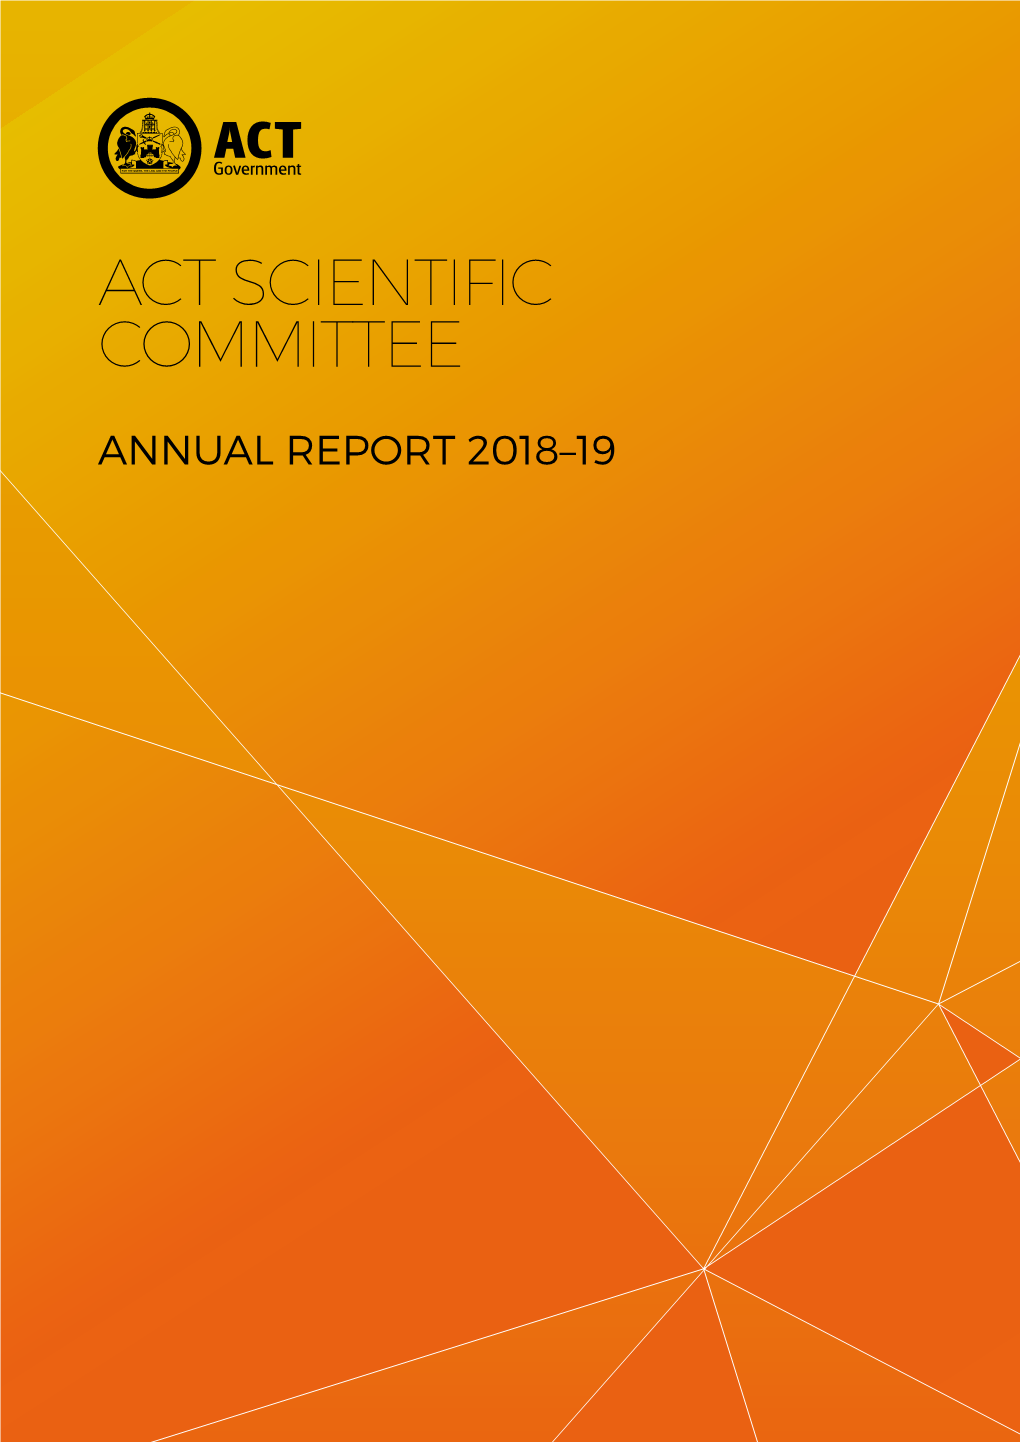 ACT Scientific Committee ANNUAL REPORT 2018-19